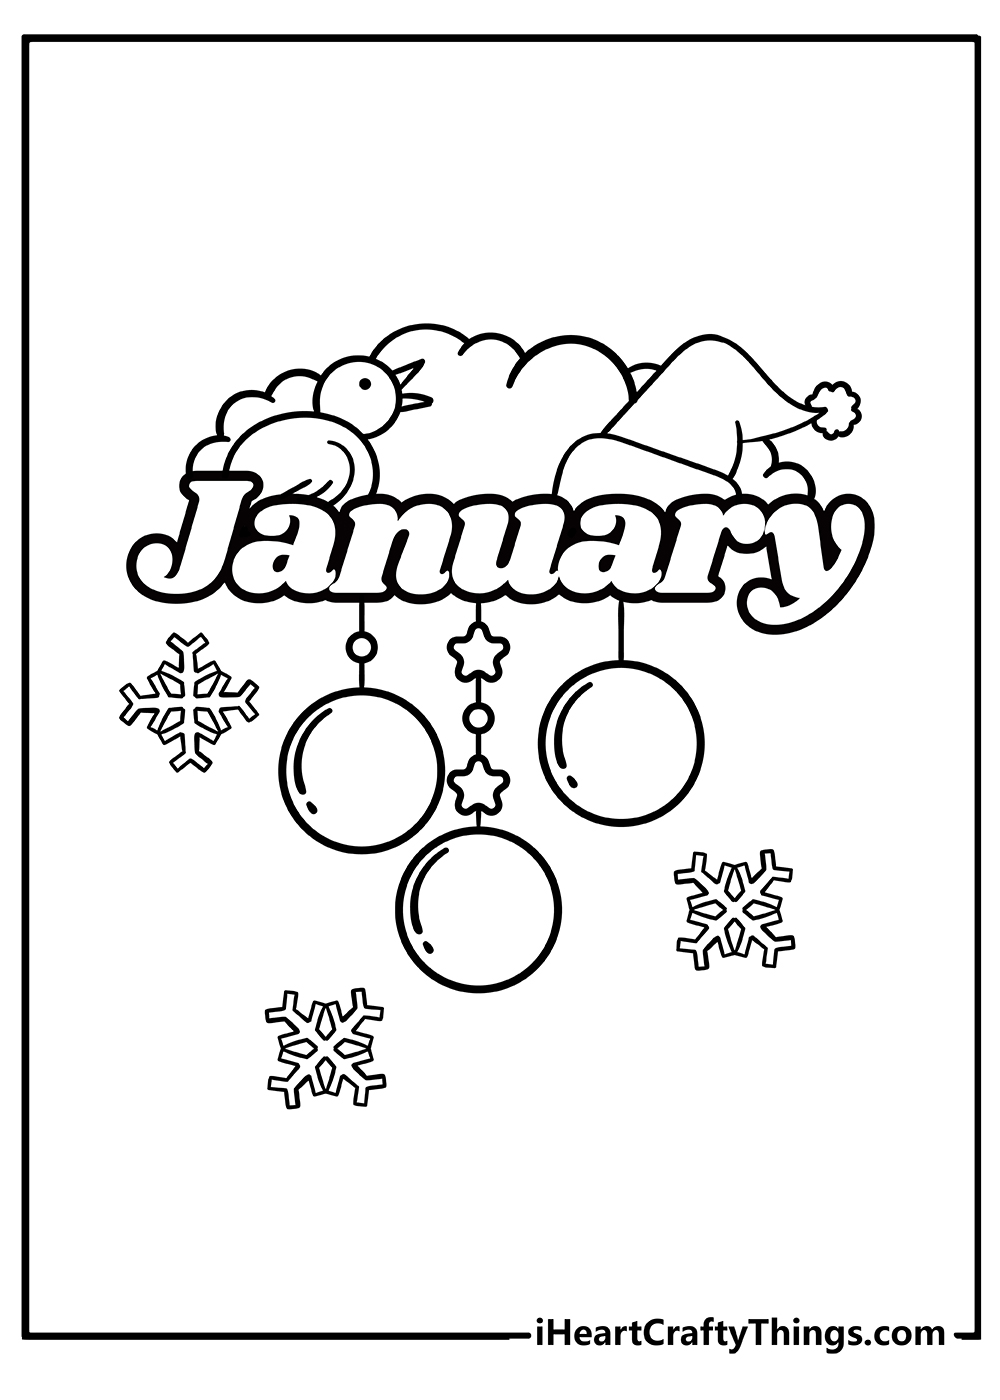 January Coloring Sheet for children free download